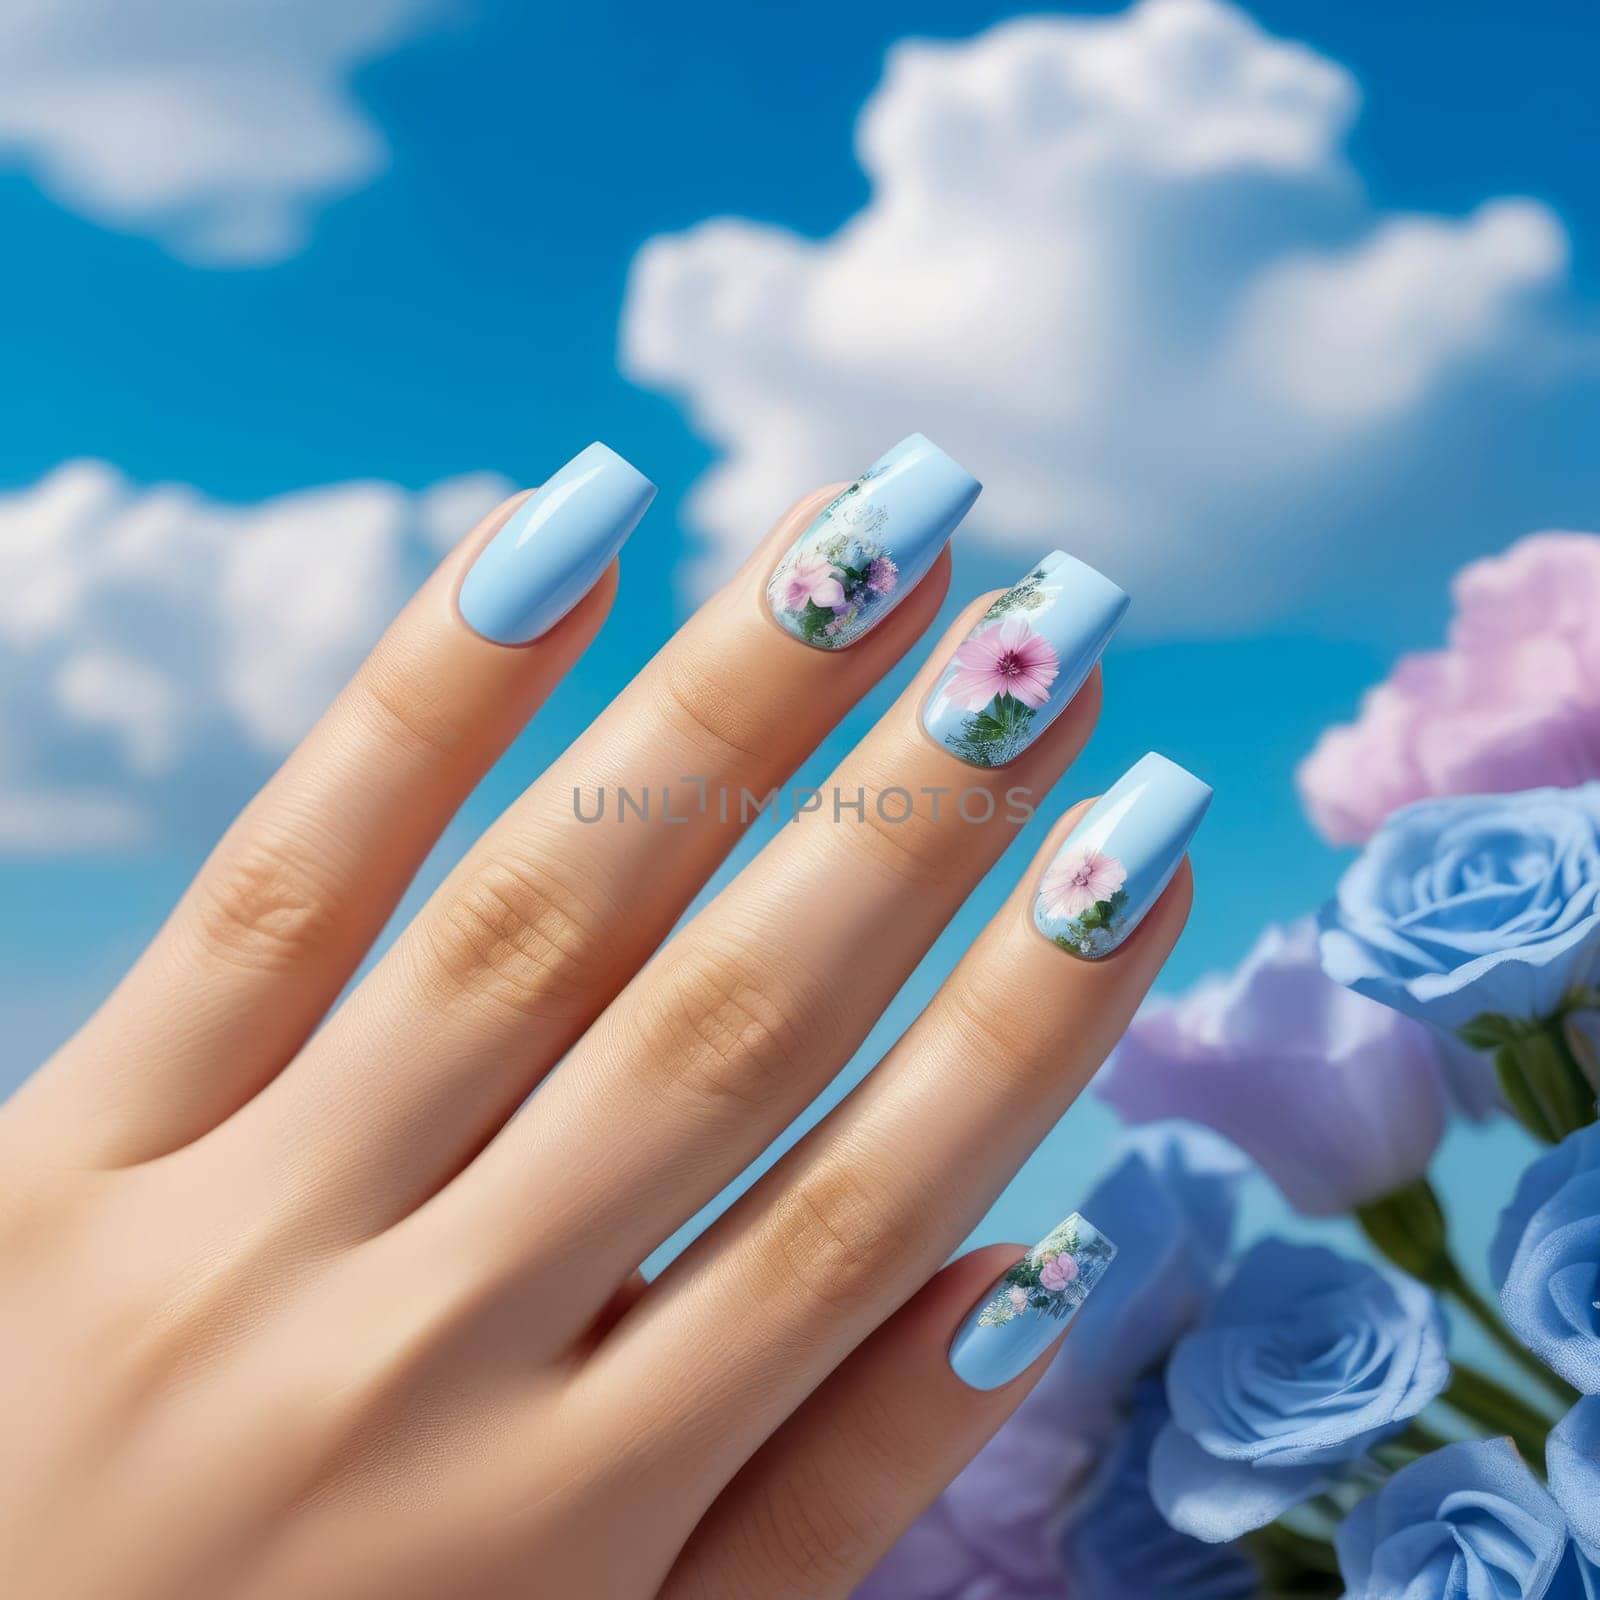 Nail design idea with square shape, pastel blue and pink tones. by OlgaGubskaya